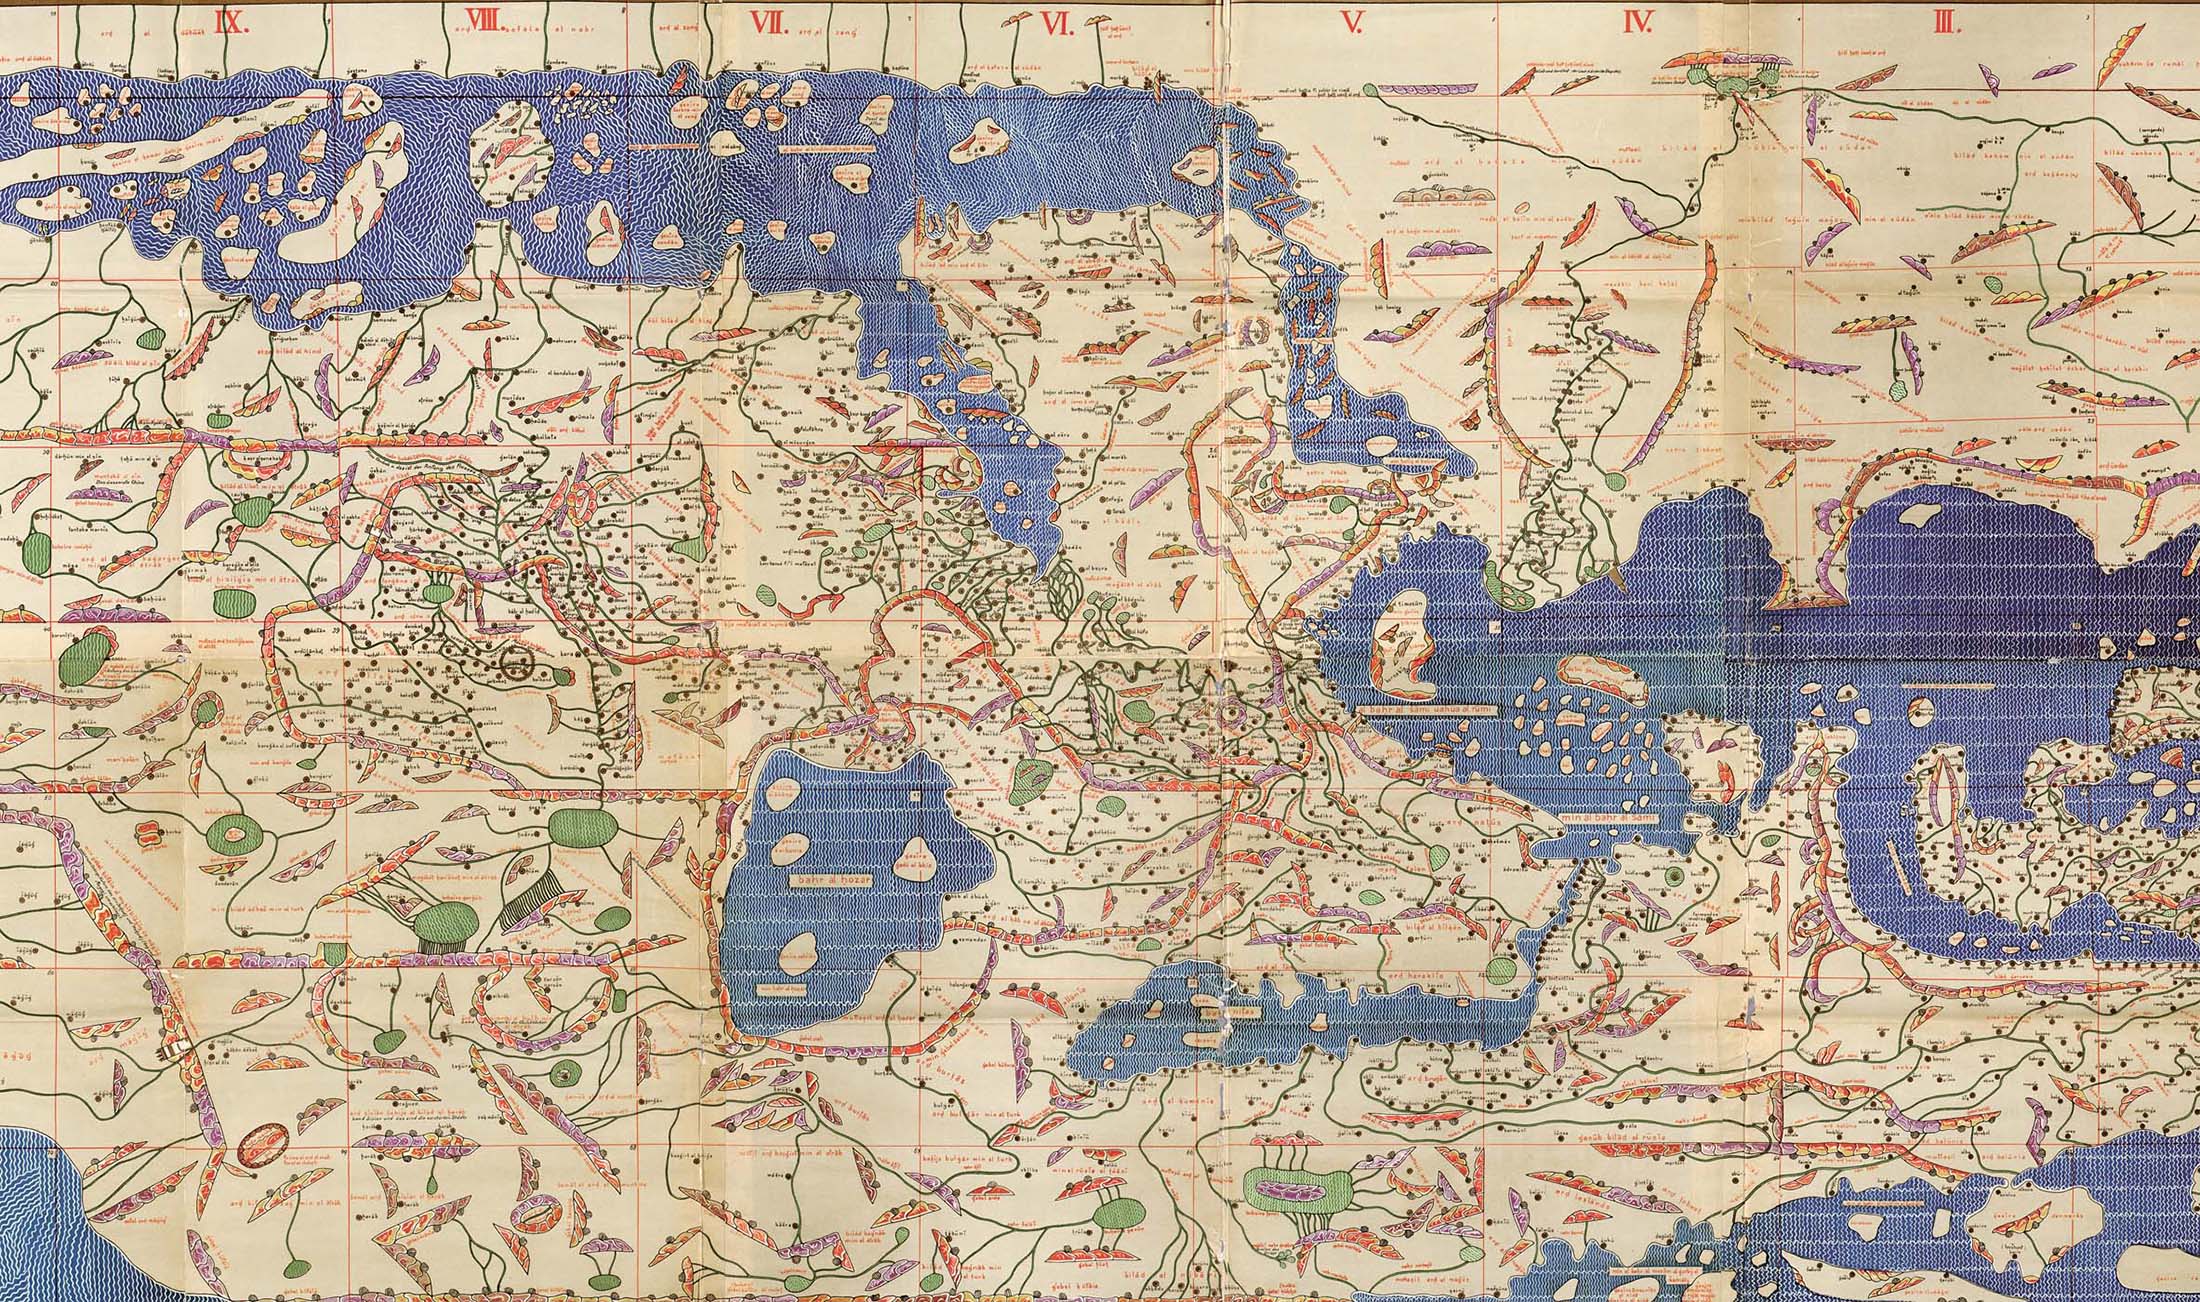 Al-Idrisis 1154 map of the world as tabulated by Ptolemy is shown with the - photo 4